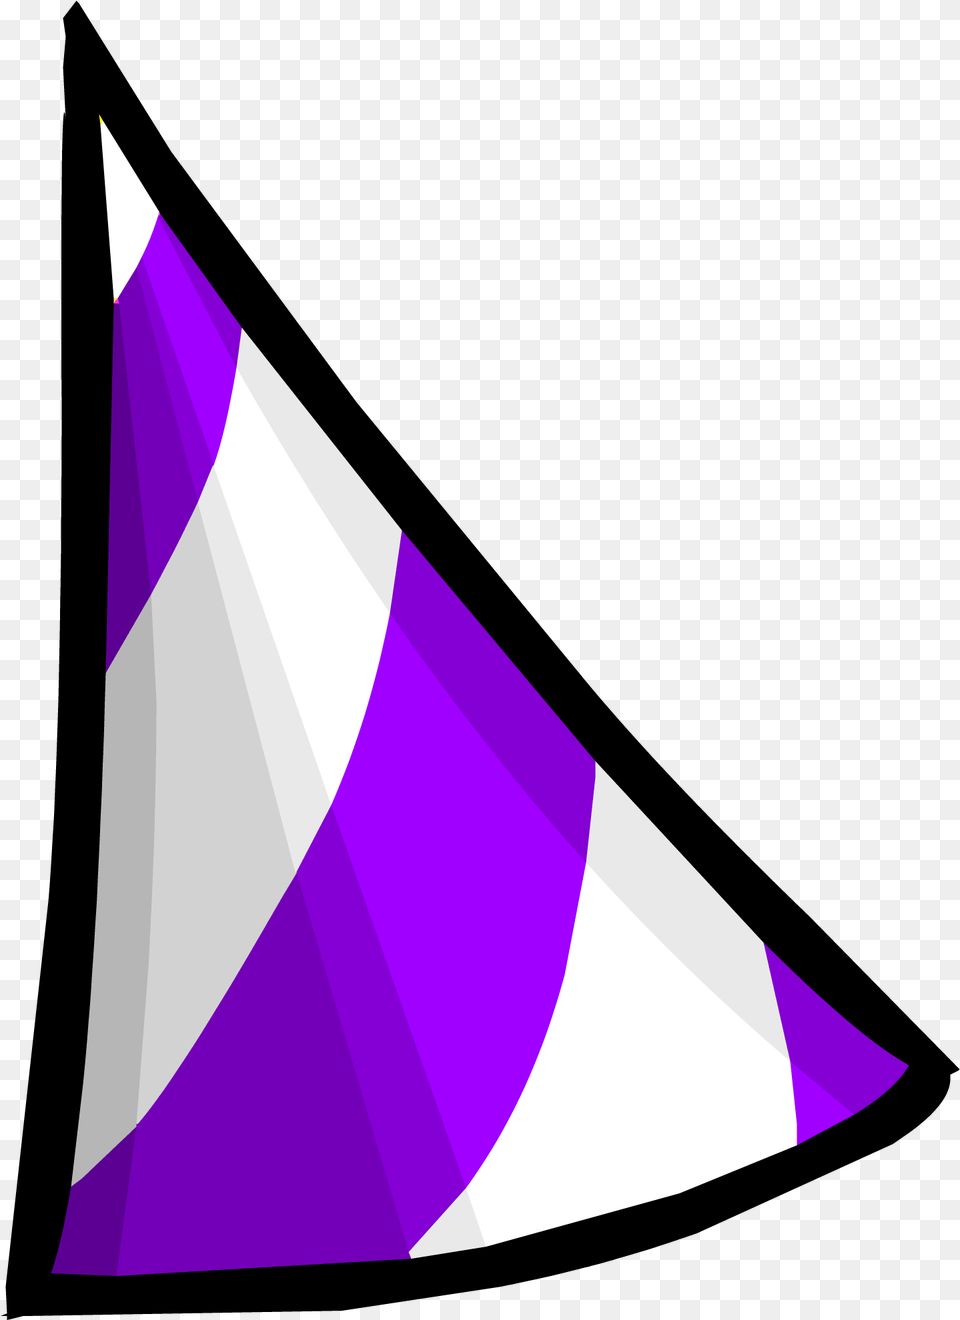 Categoryparty Items Club Penguin Rewritten Wiki Fandom Club Penguin Party Hat, Clothing, Triangle, Purple, Rocket Png